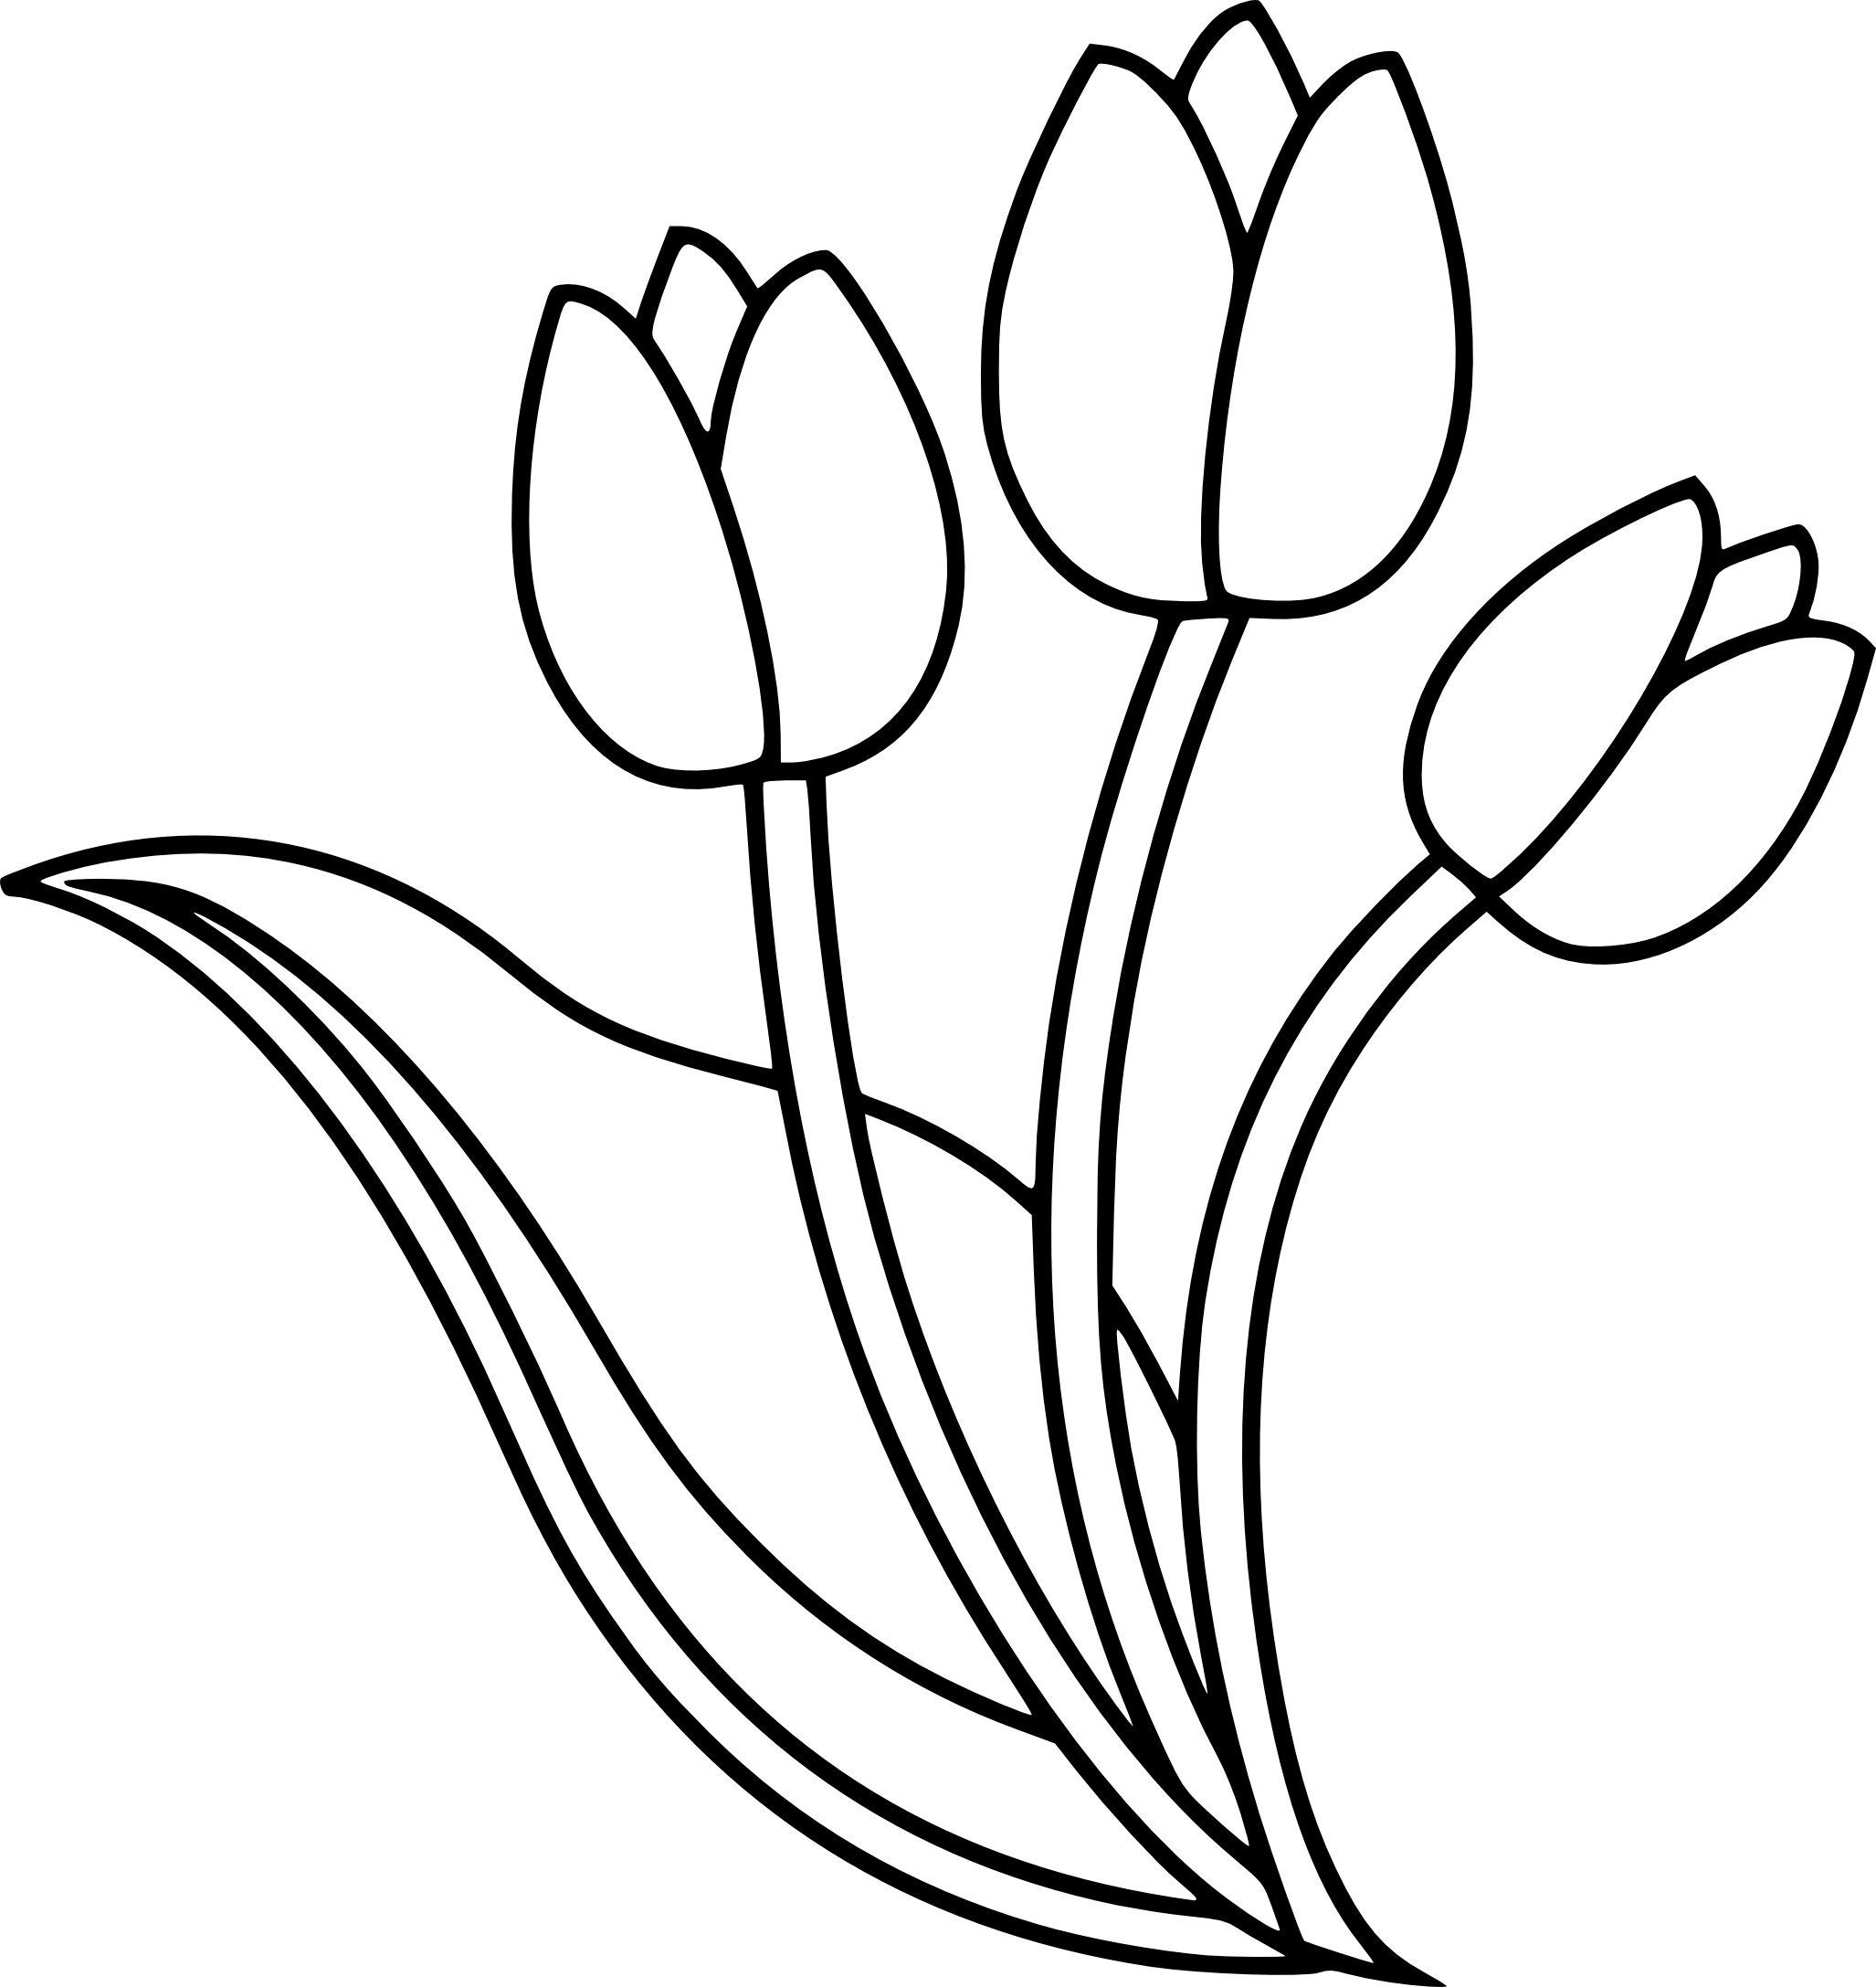 Grand tulips coloring for pre-k